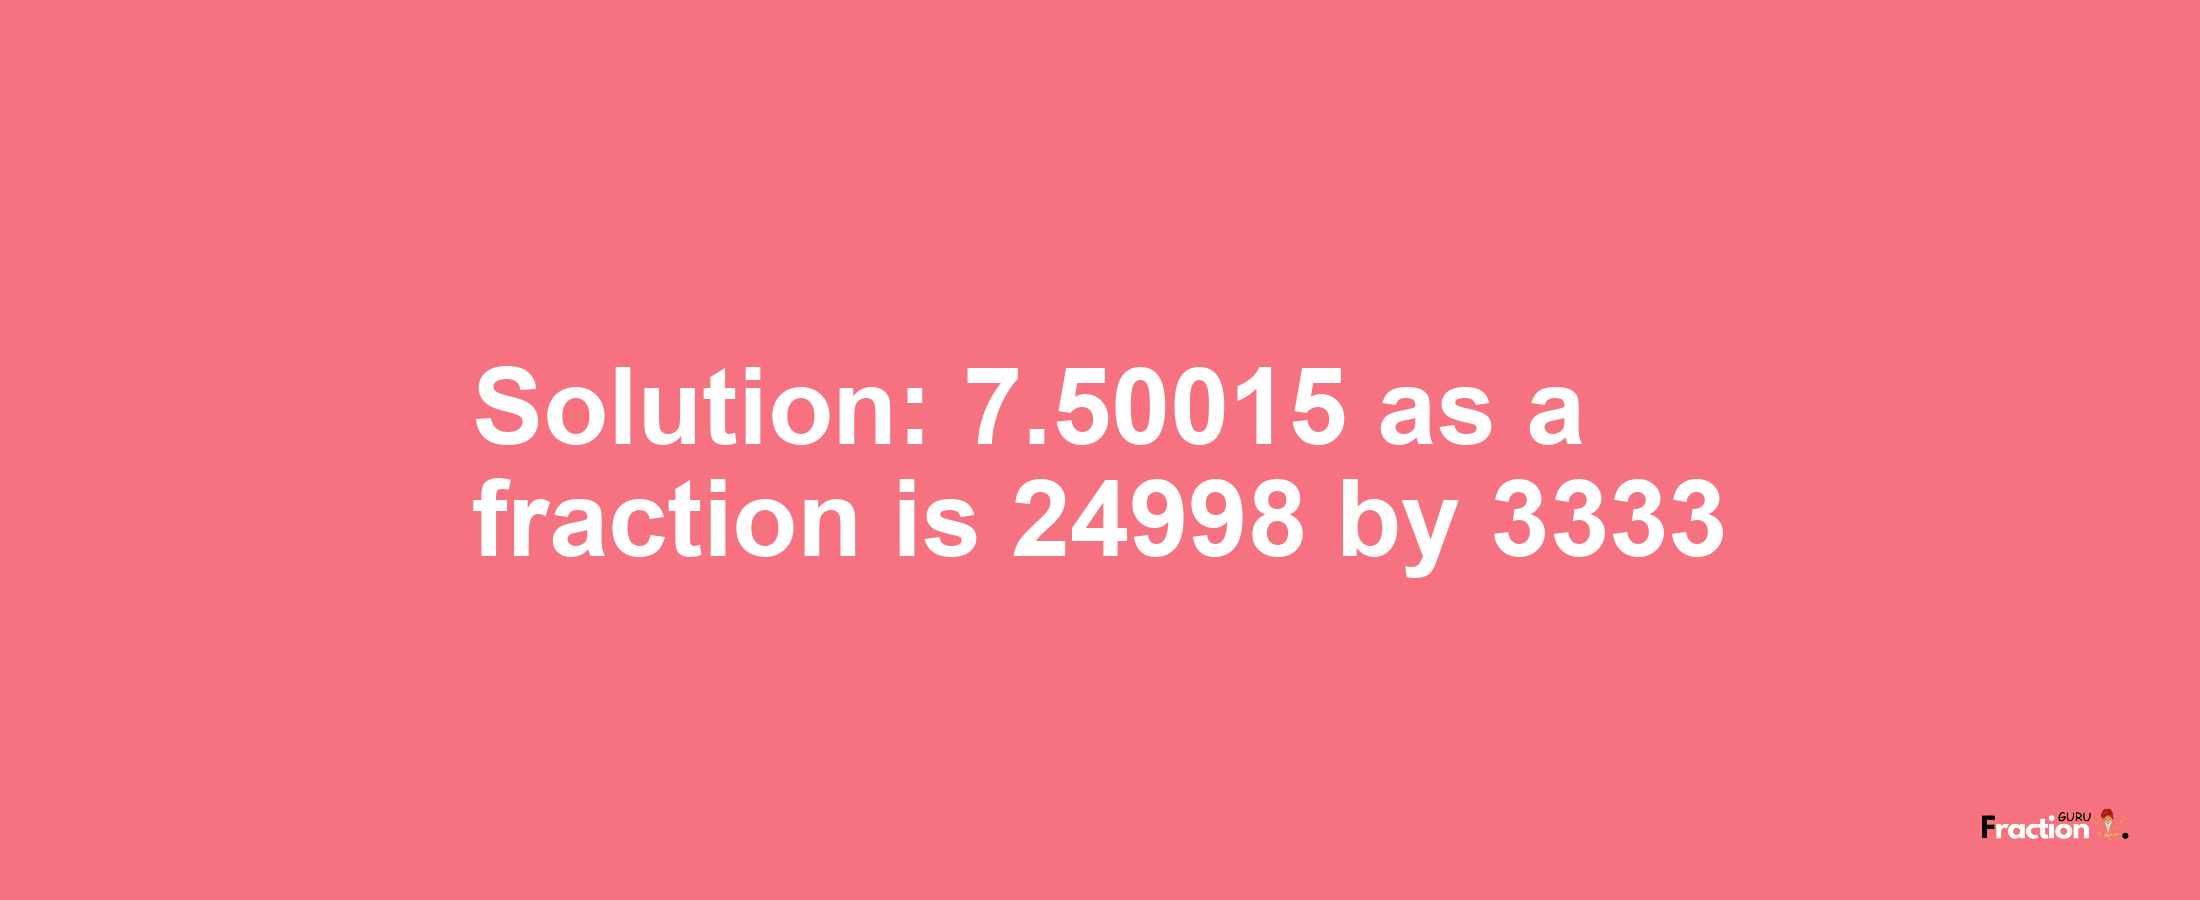 Solution:7.50015 as a fraction is 24998/3333